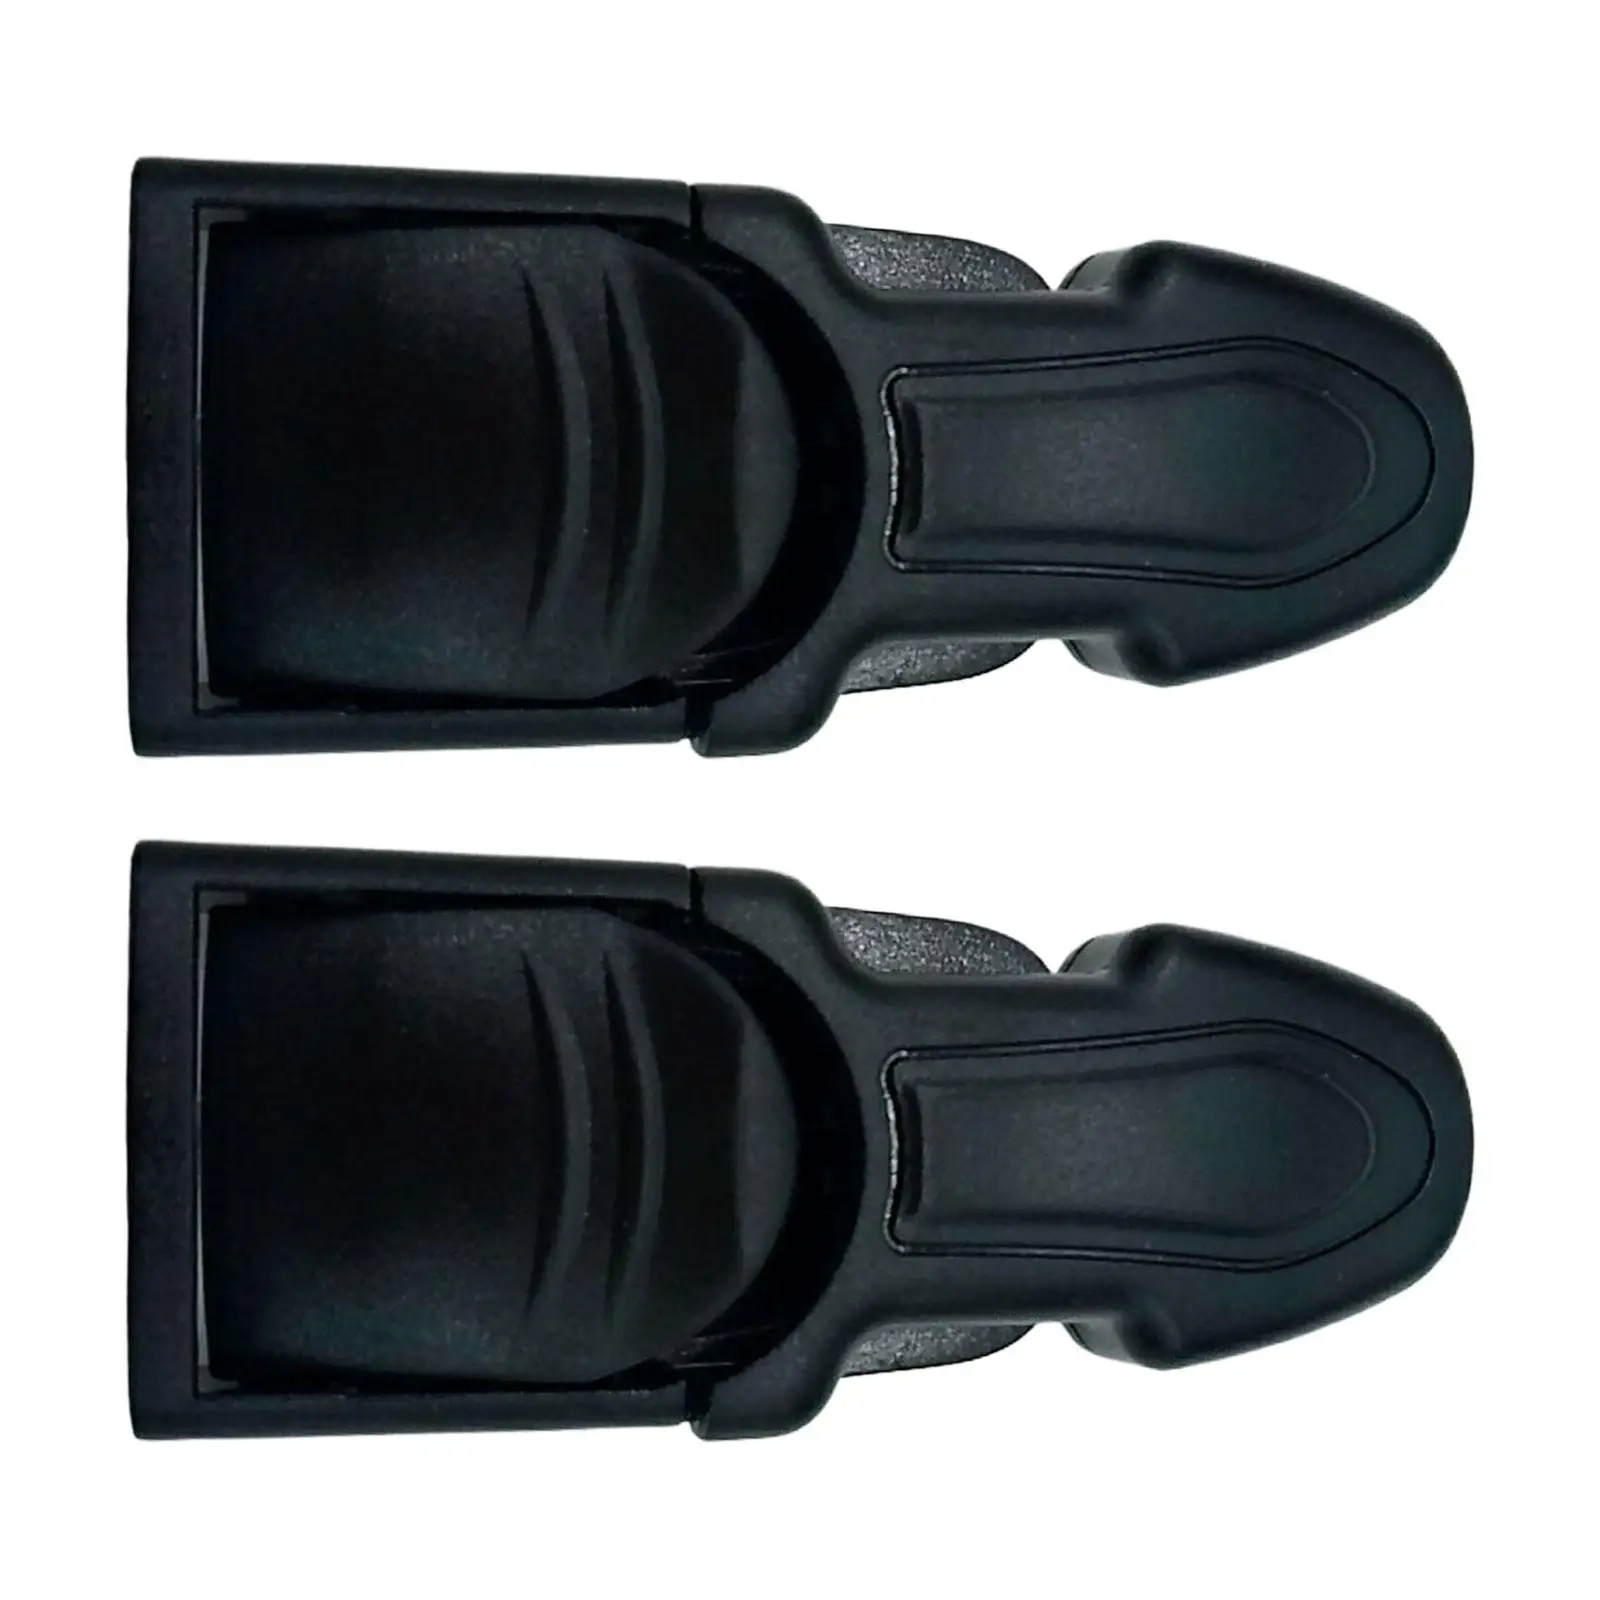 2 Pieces Diving Fin Strap Buckles Universal Swimming Fin Flippers Buckles Replace Part for Freediving Scuba Diving Snorkeling